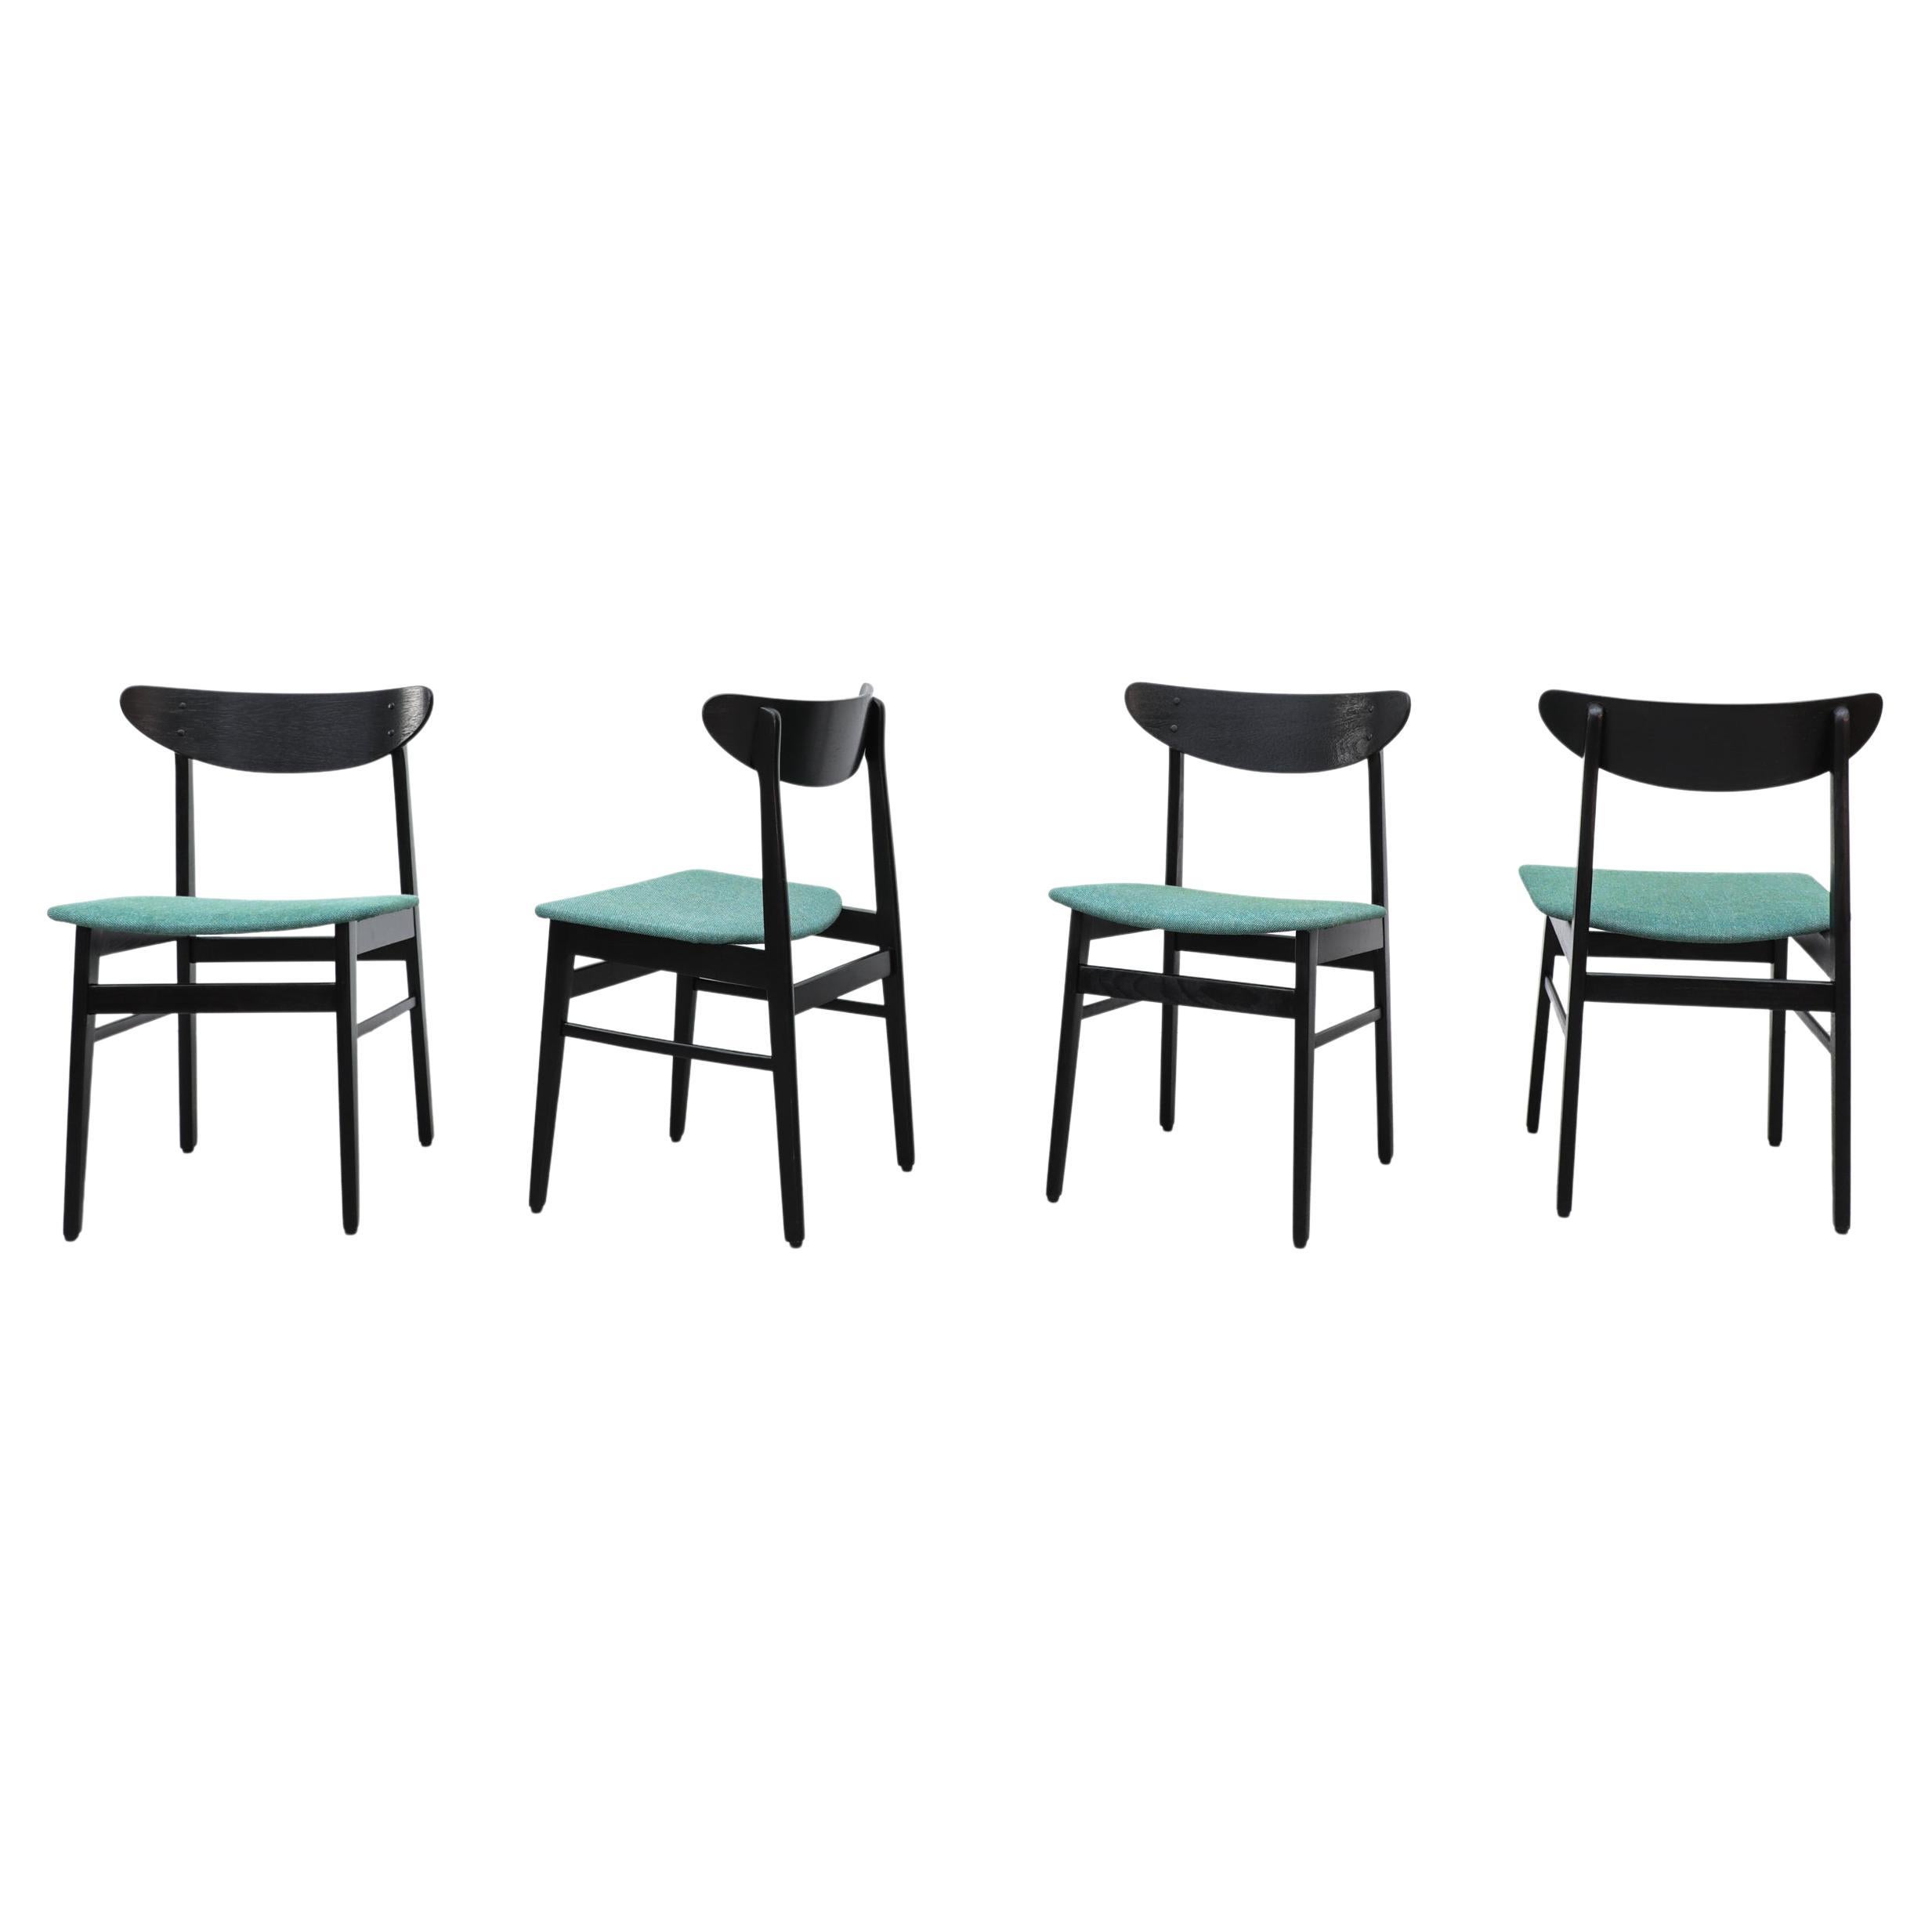 Set of 4 Wegner Style Black Lacquered Dining Chairs by Farstrup with Green Seats